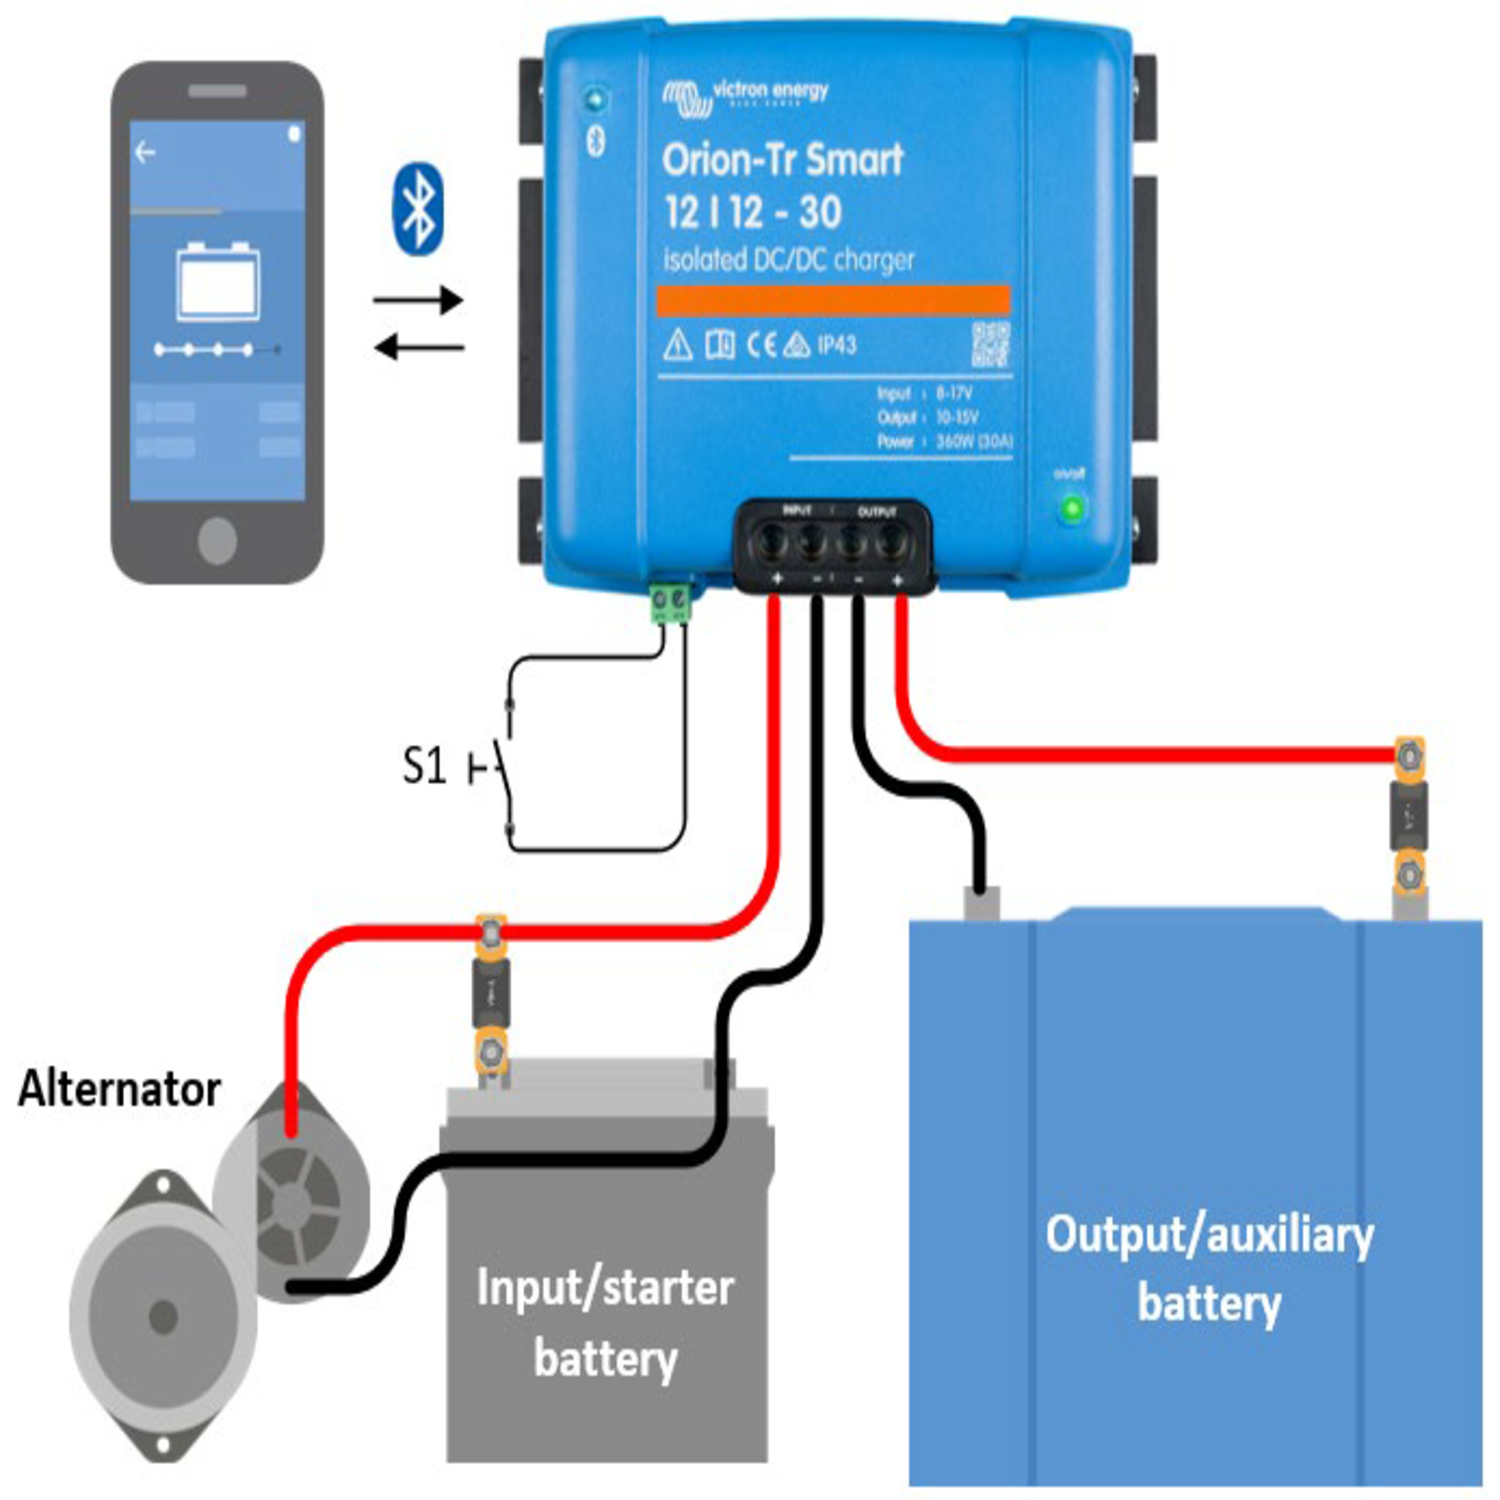 18A DC-DC charger by Victron Energy - Canbat Technologies Inc.